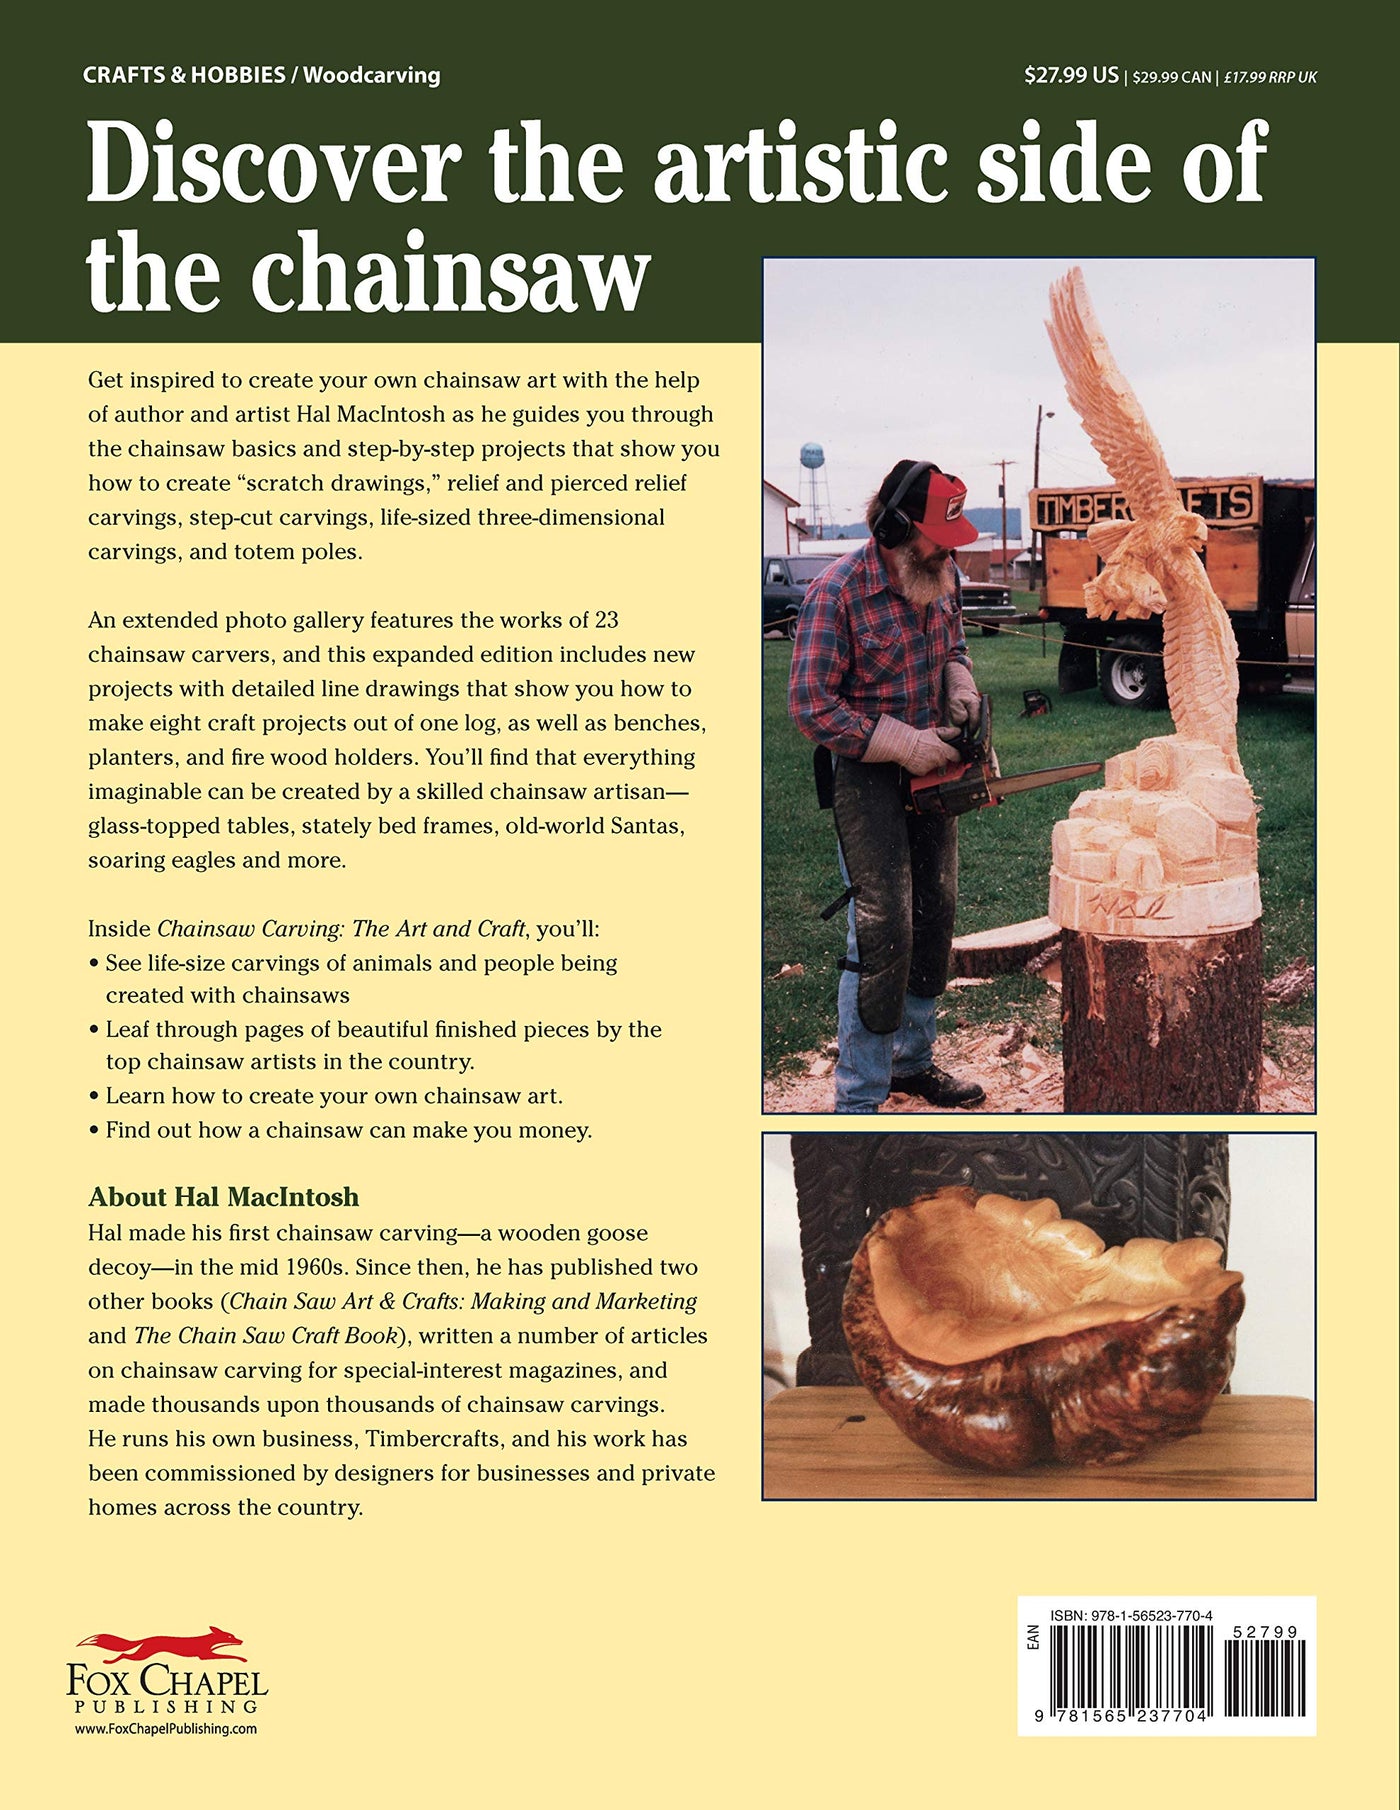 Chainsaw Carving: The Art and Craft, 2nd Edition Revised and Expanded (Fox Chapel Publishing) Find Inspiration to Create Your Own Chainsaw Art; Gallery of 23 Chainsaw Carving Artists & Chainsaw Basics